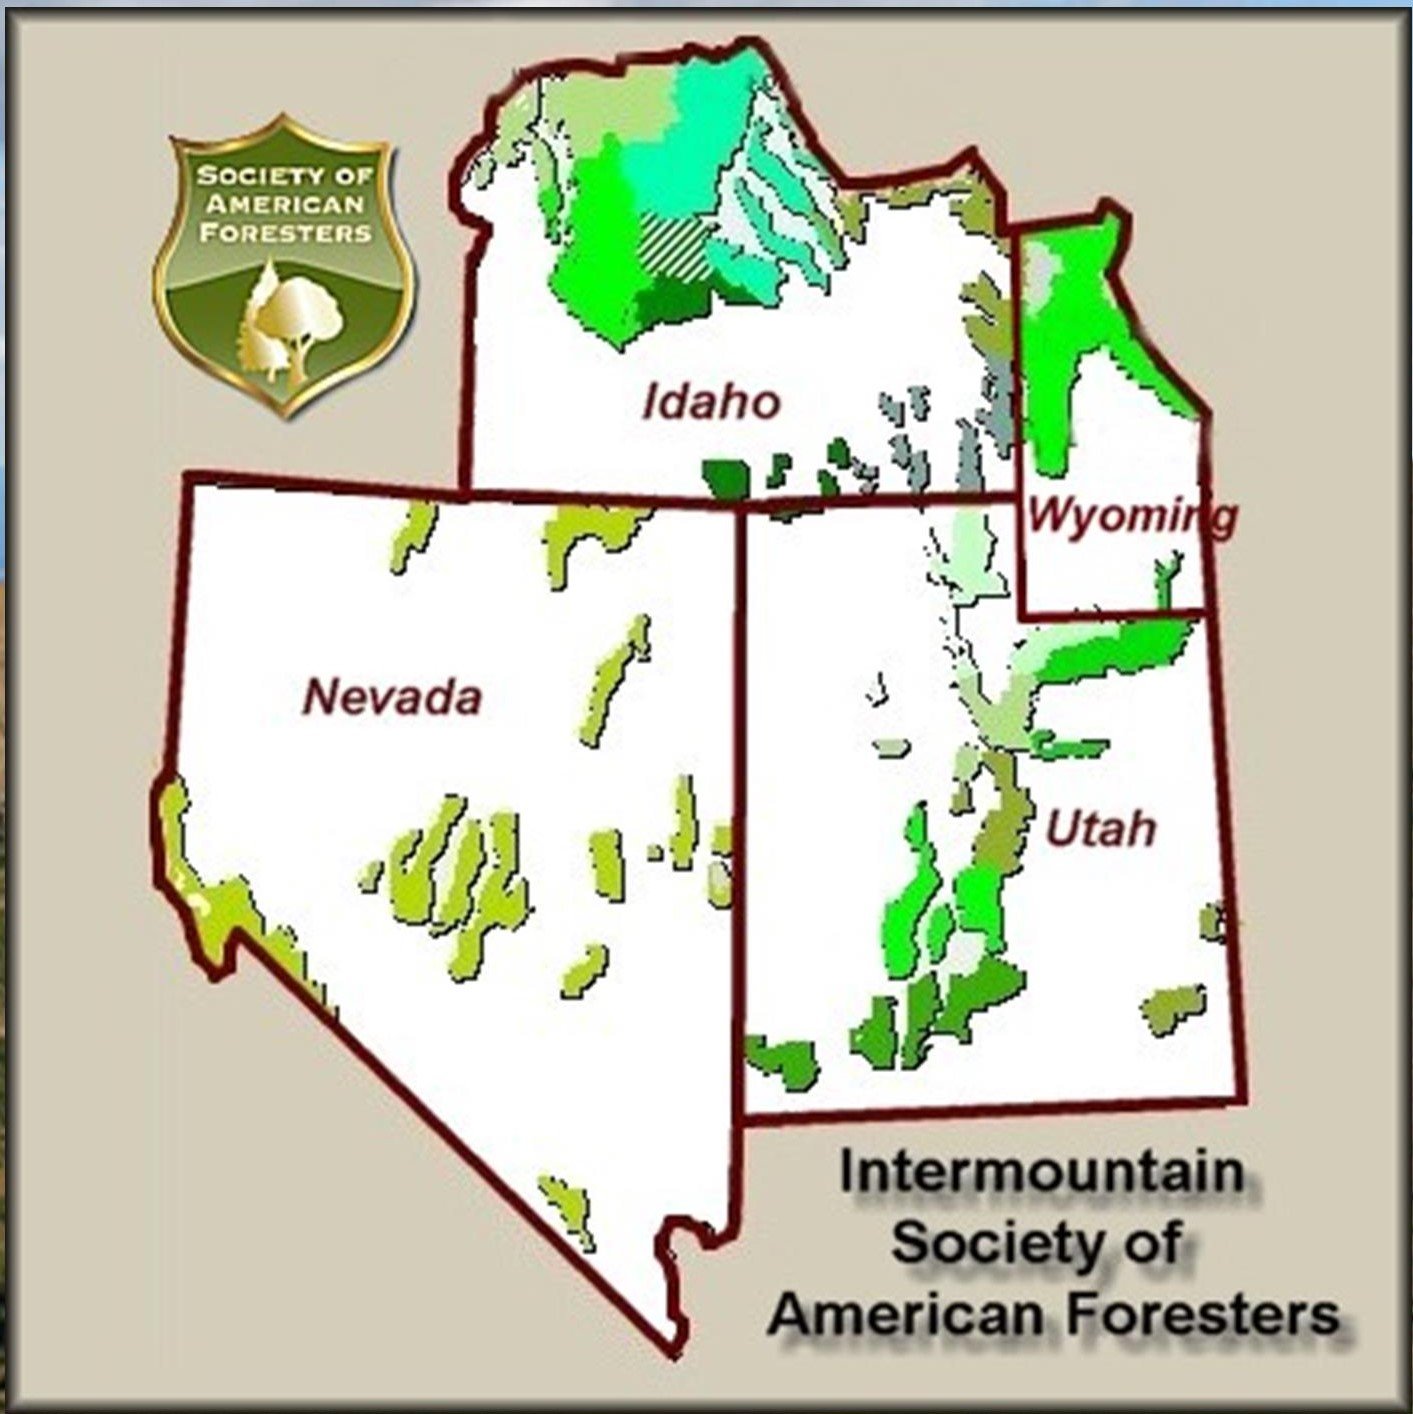 Intermountain Society of American Foresters, Inc.